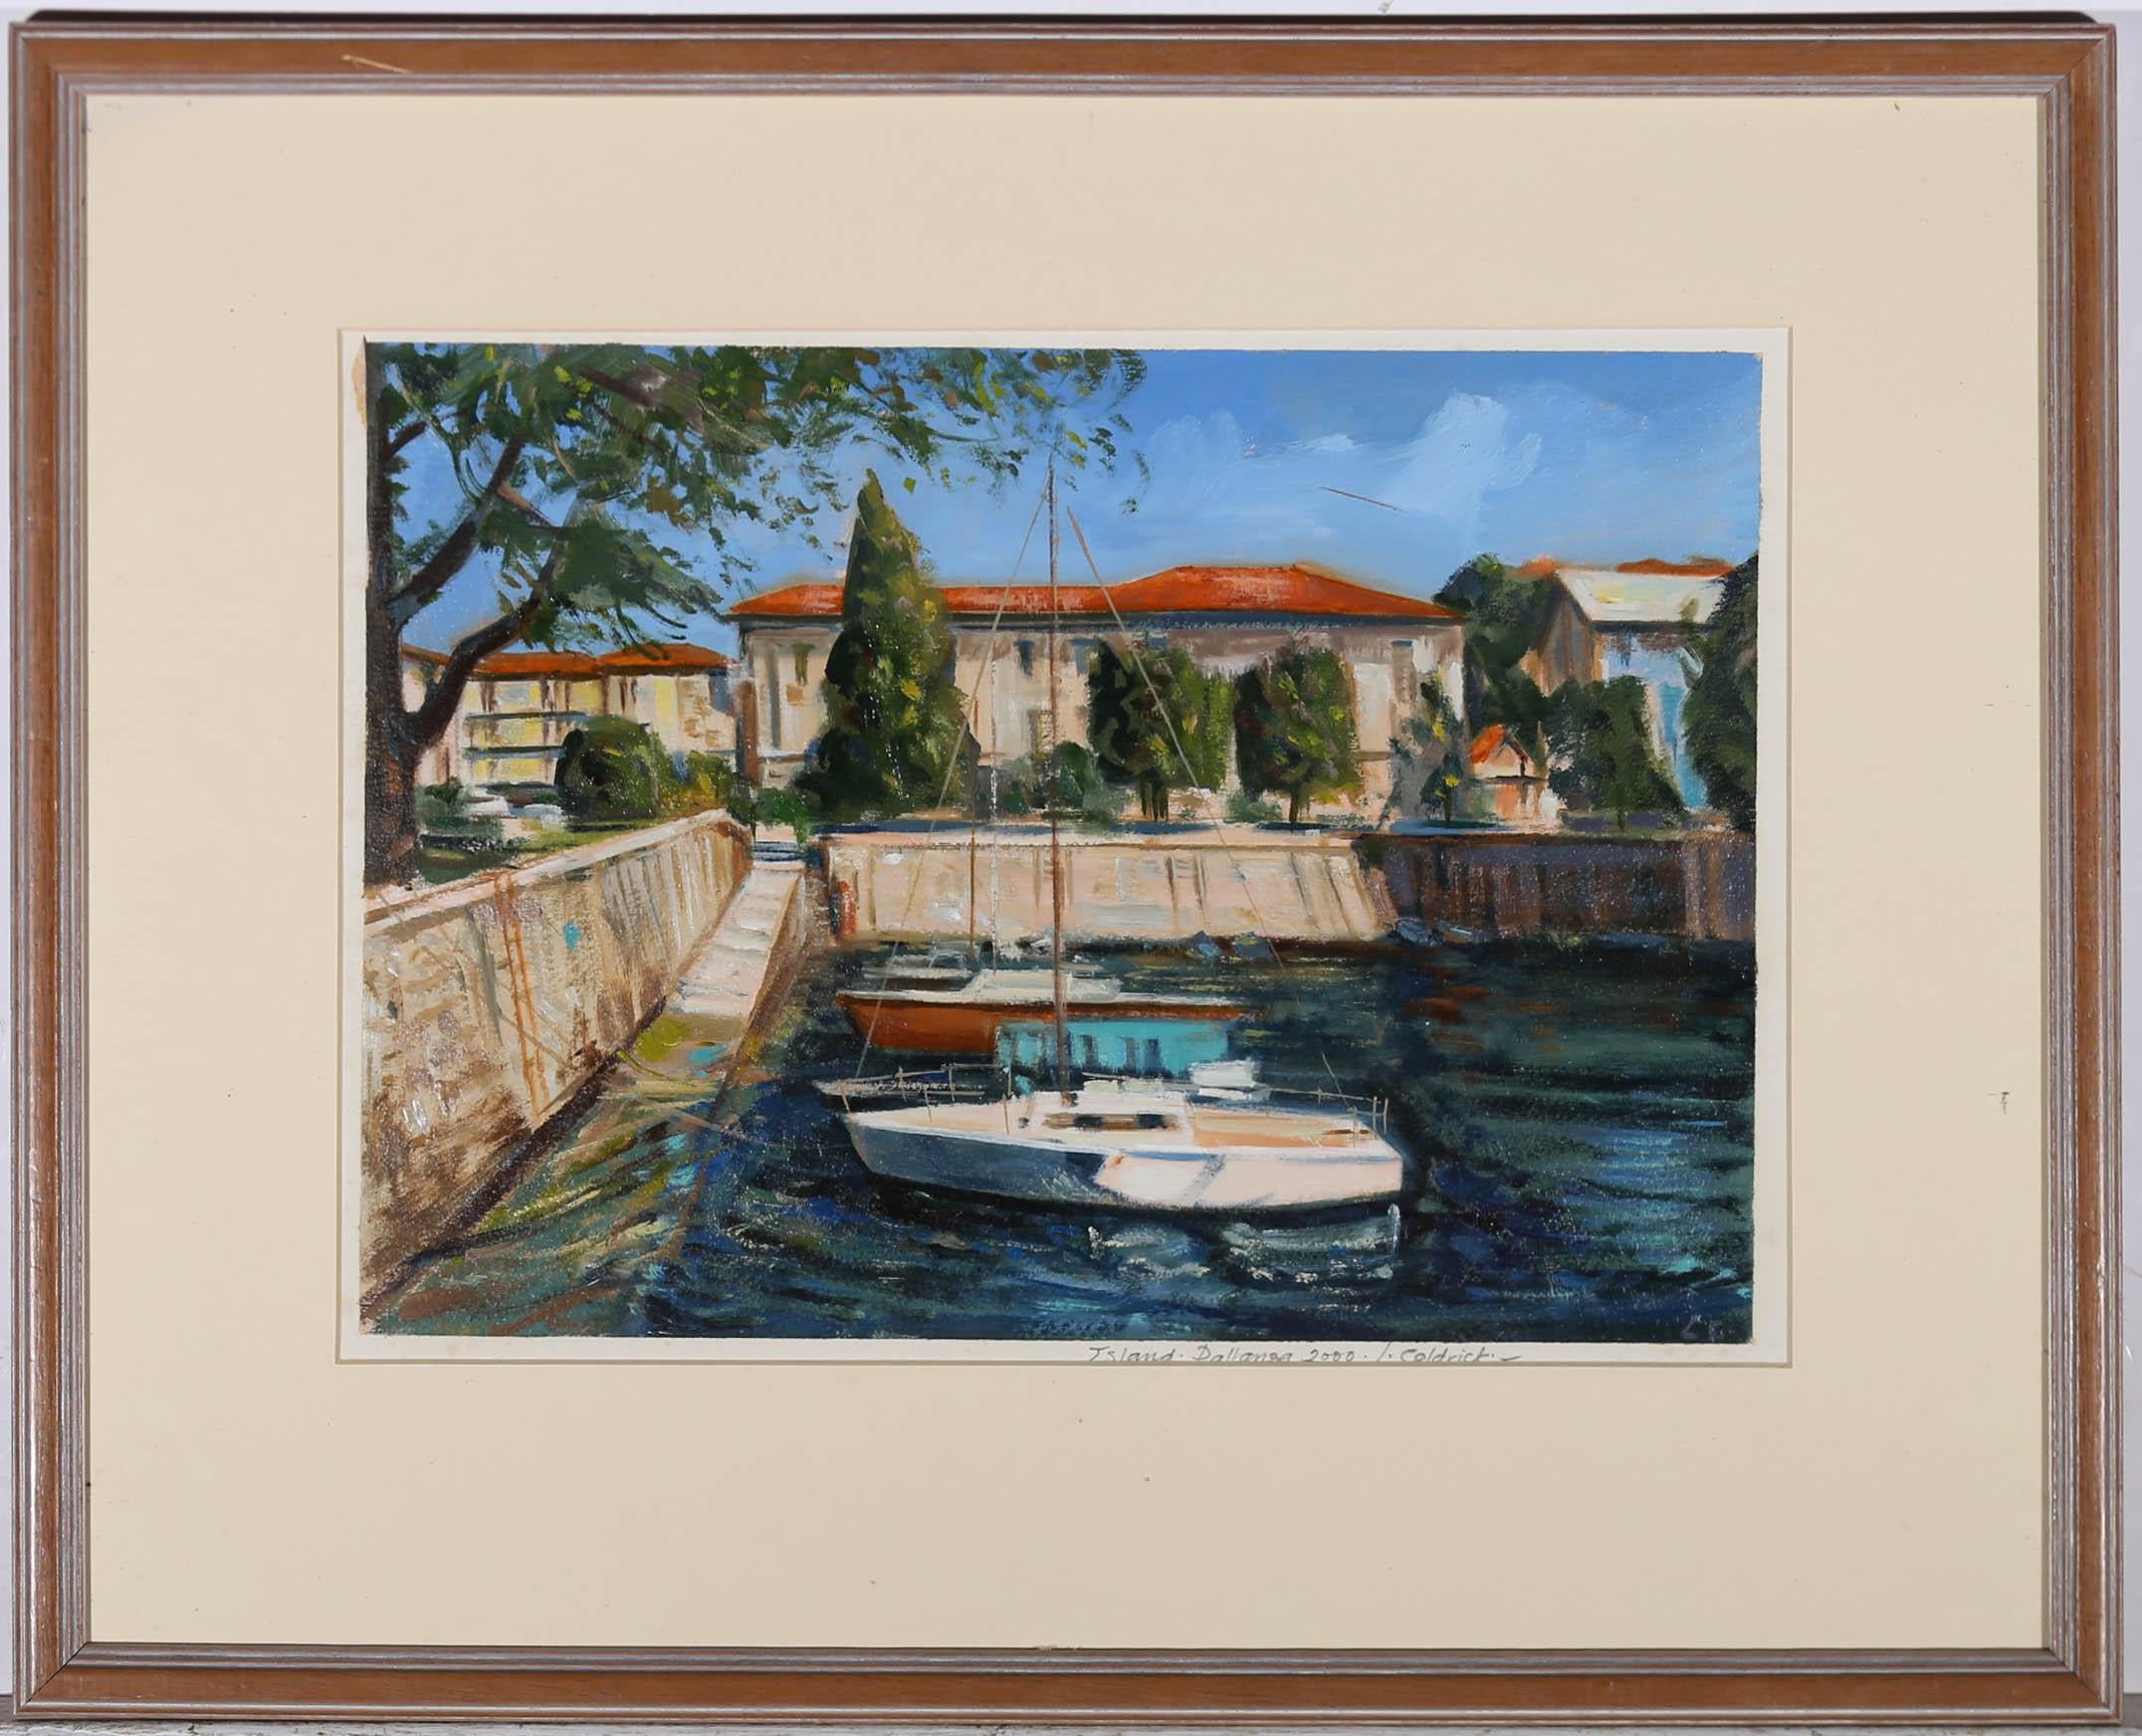 A colourful impressionistic oil painting, by Leslie Coldrick, depicting moored boats in a harbour with continental coastal apartments across the street. Signed in graphite. The painting is well presented in a sleek wooden frame and cream mount.